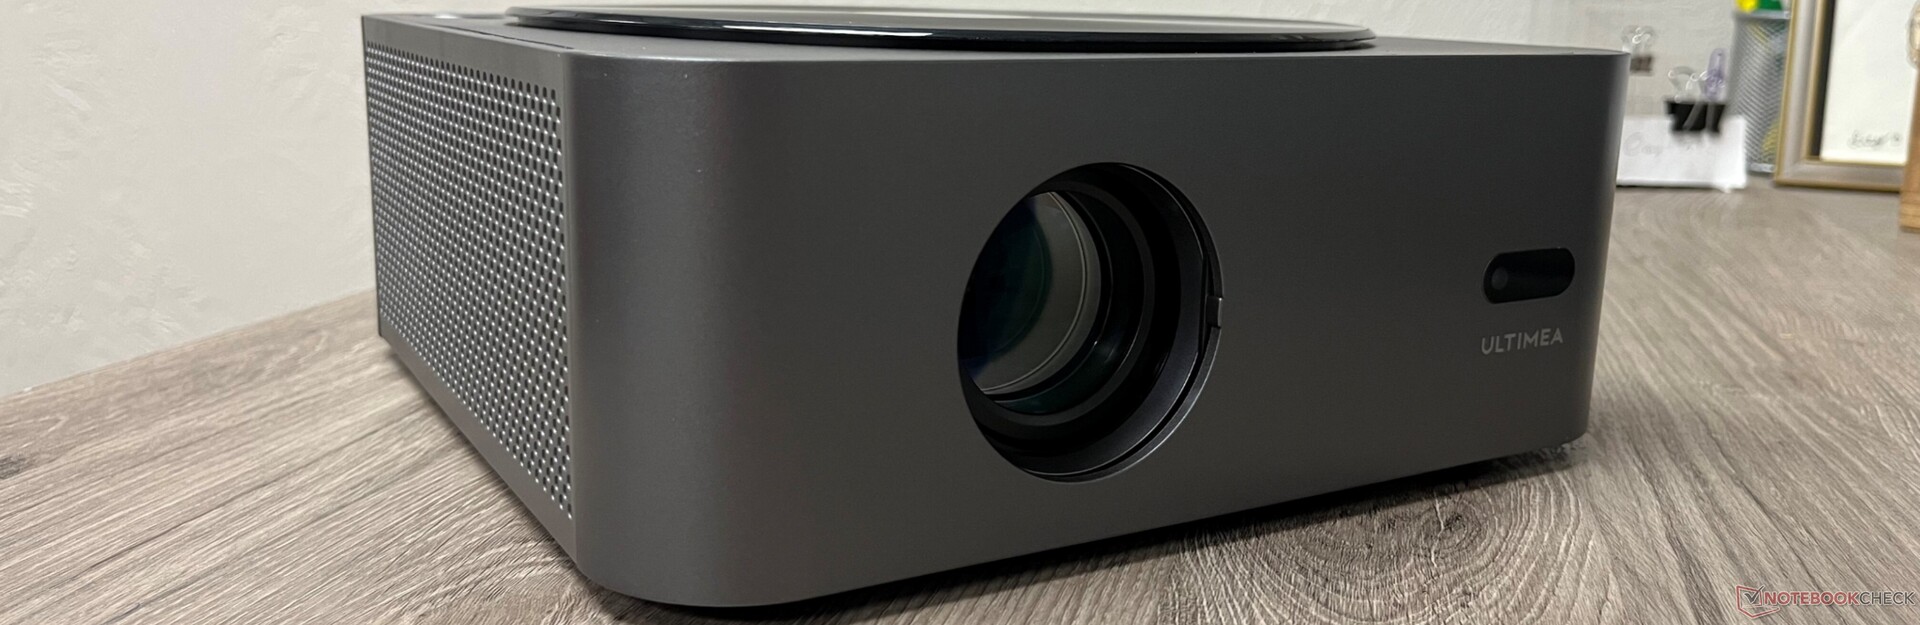 ULTIMEA Apollo P40 Review: Bright and Affordable Projector!